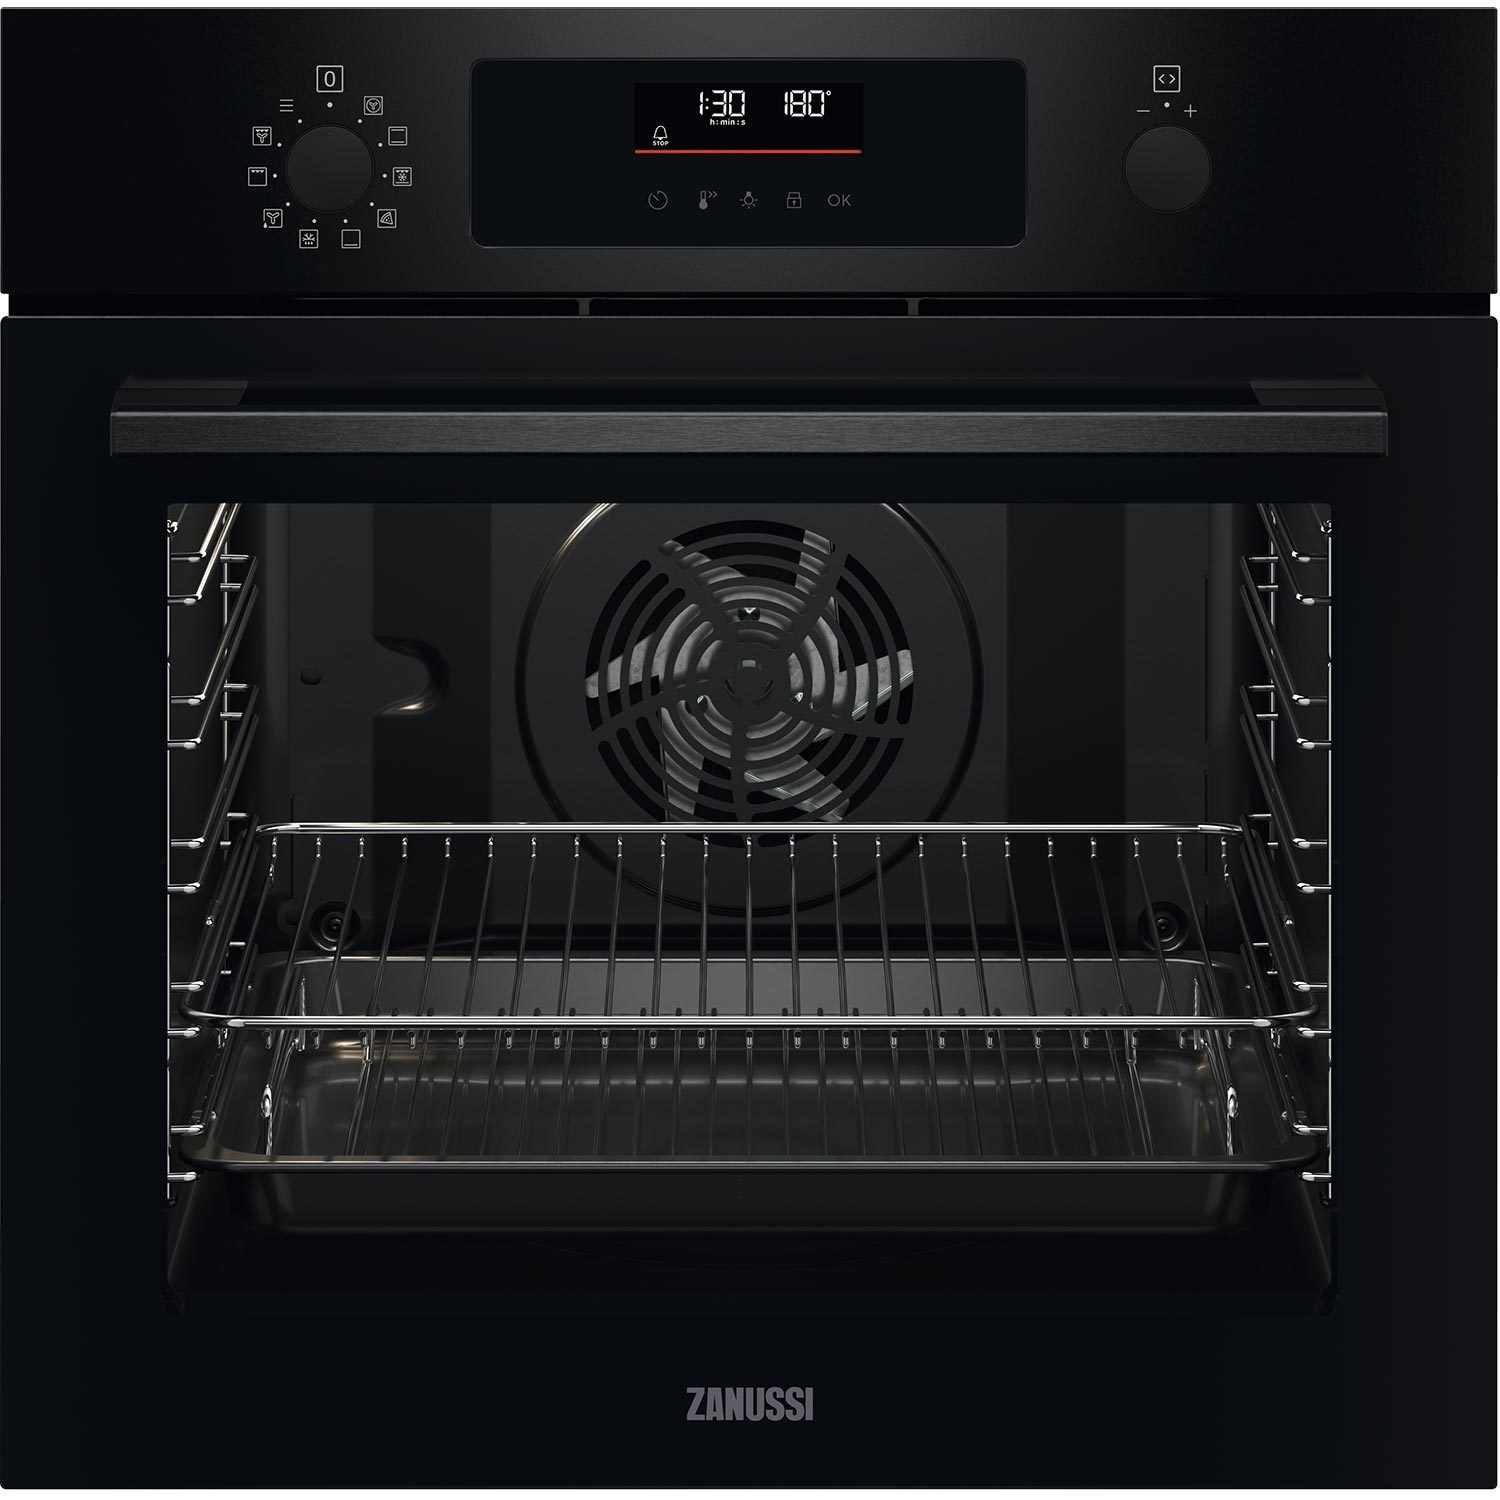 Photos - Other for Computer Zanussi Series 60 Electric Single Oven - Black ZOPNX6KN 